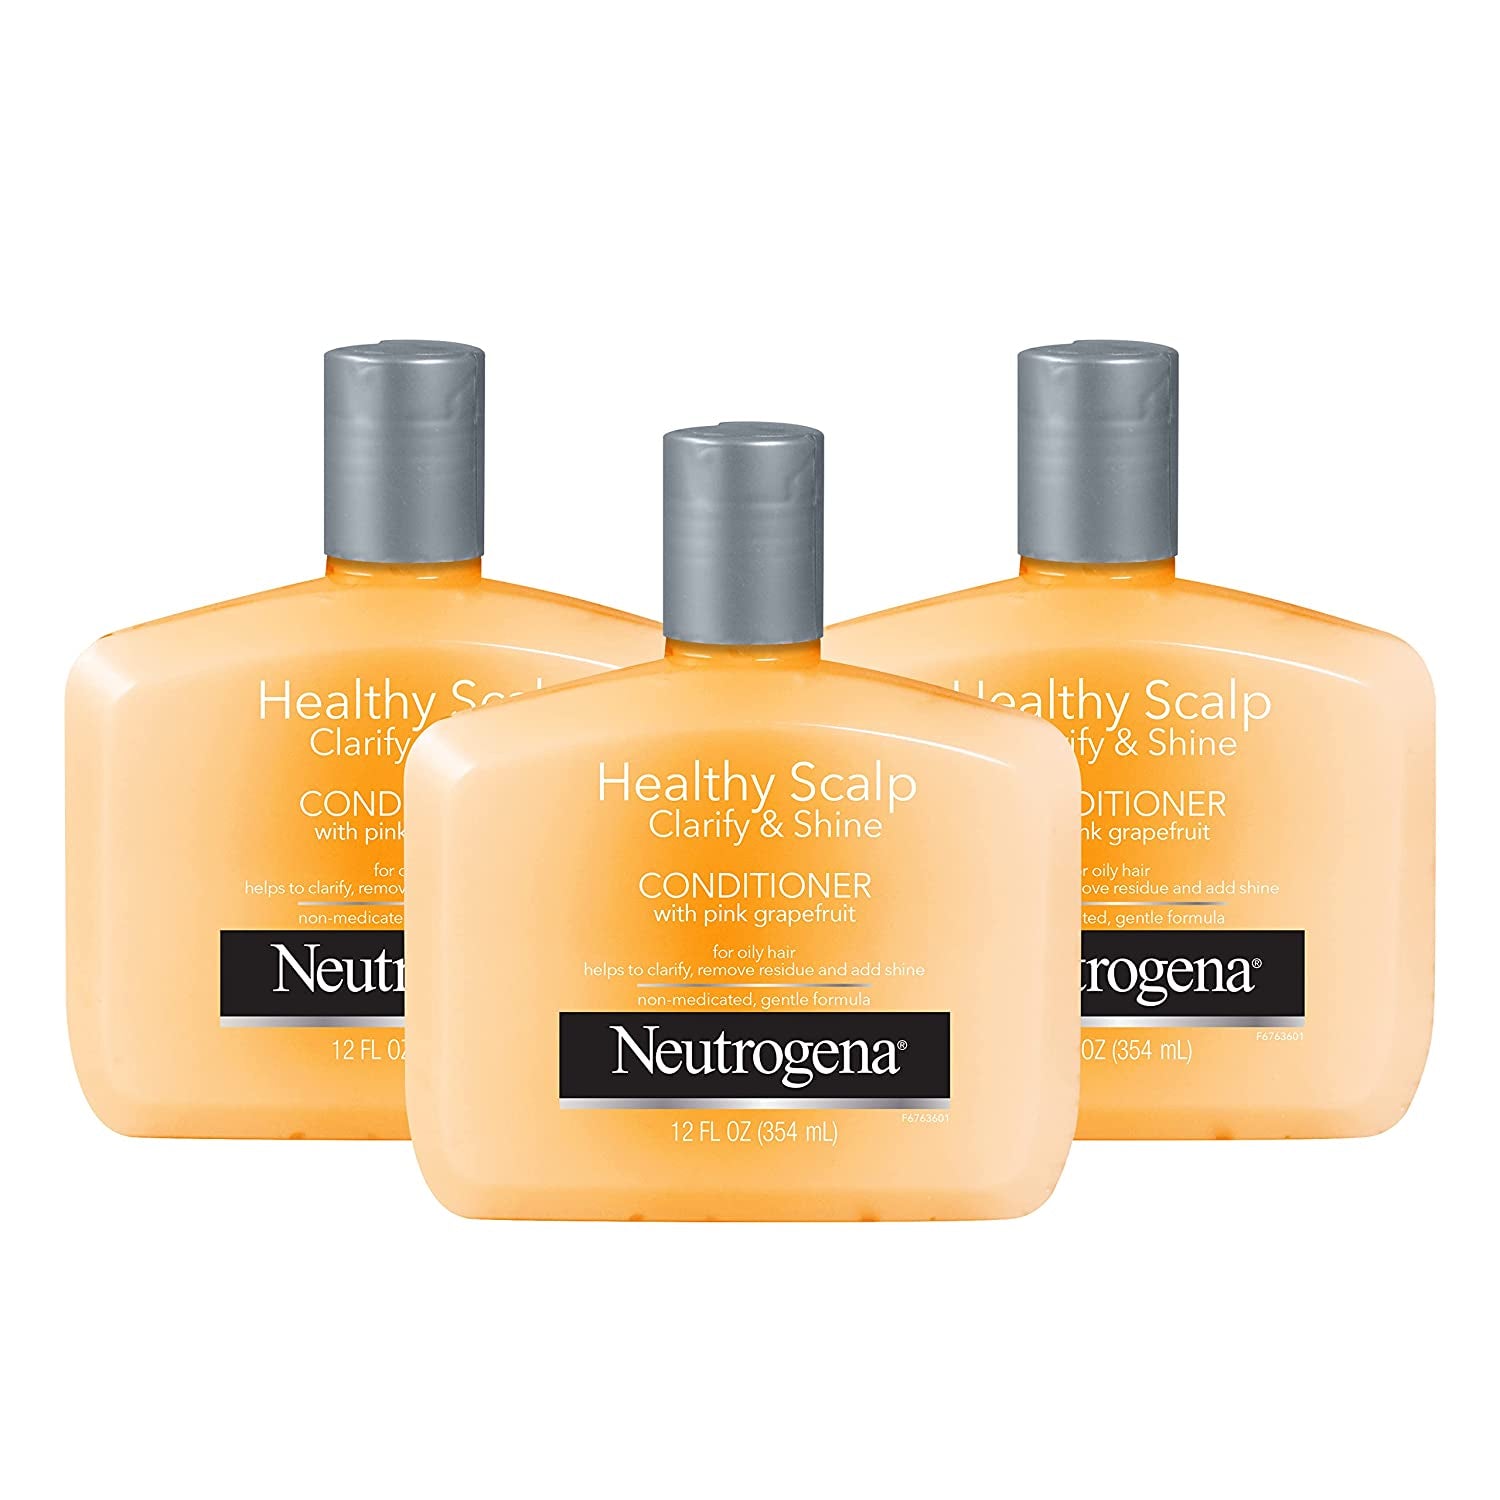 Neutrogena Exfoliating Healthy Scalp Clarify & Shine Conditioner for Oily Hair and Scalp, Anti-Residue Conditioner with Pink Grapefruit, Paraben & Phthalate-Free, Color-Safe, 12 Fl Oz (Pack of 3)